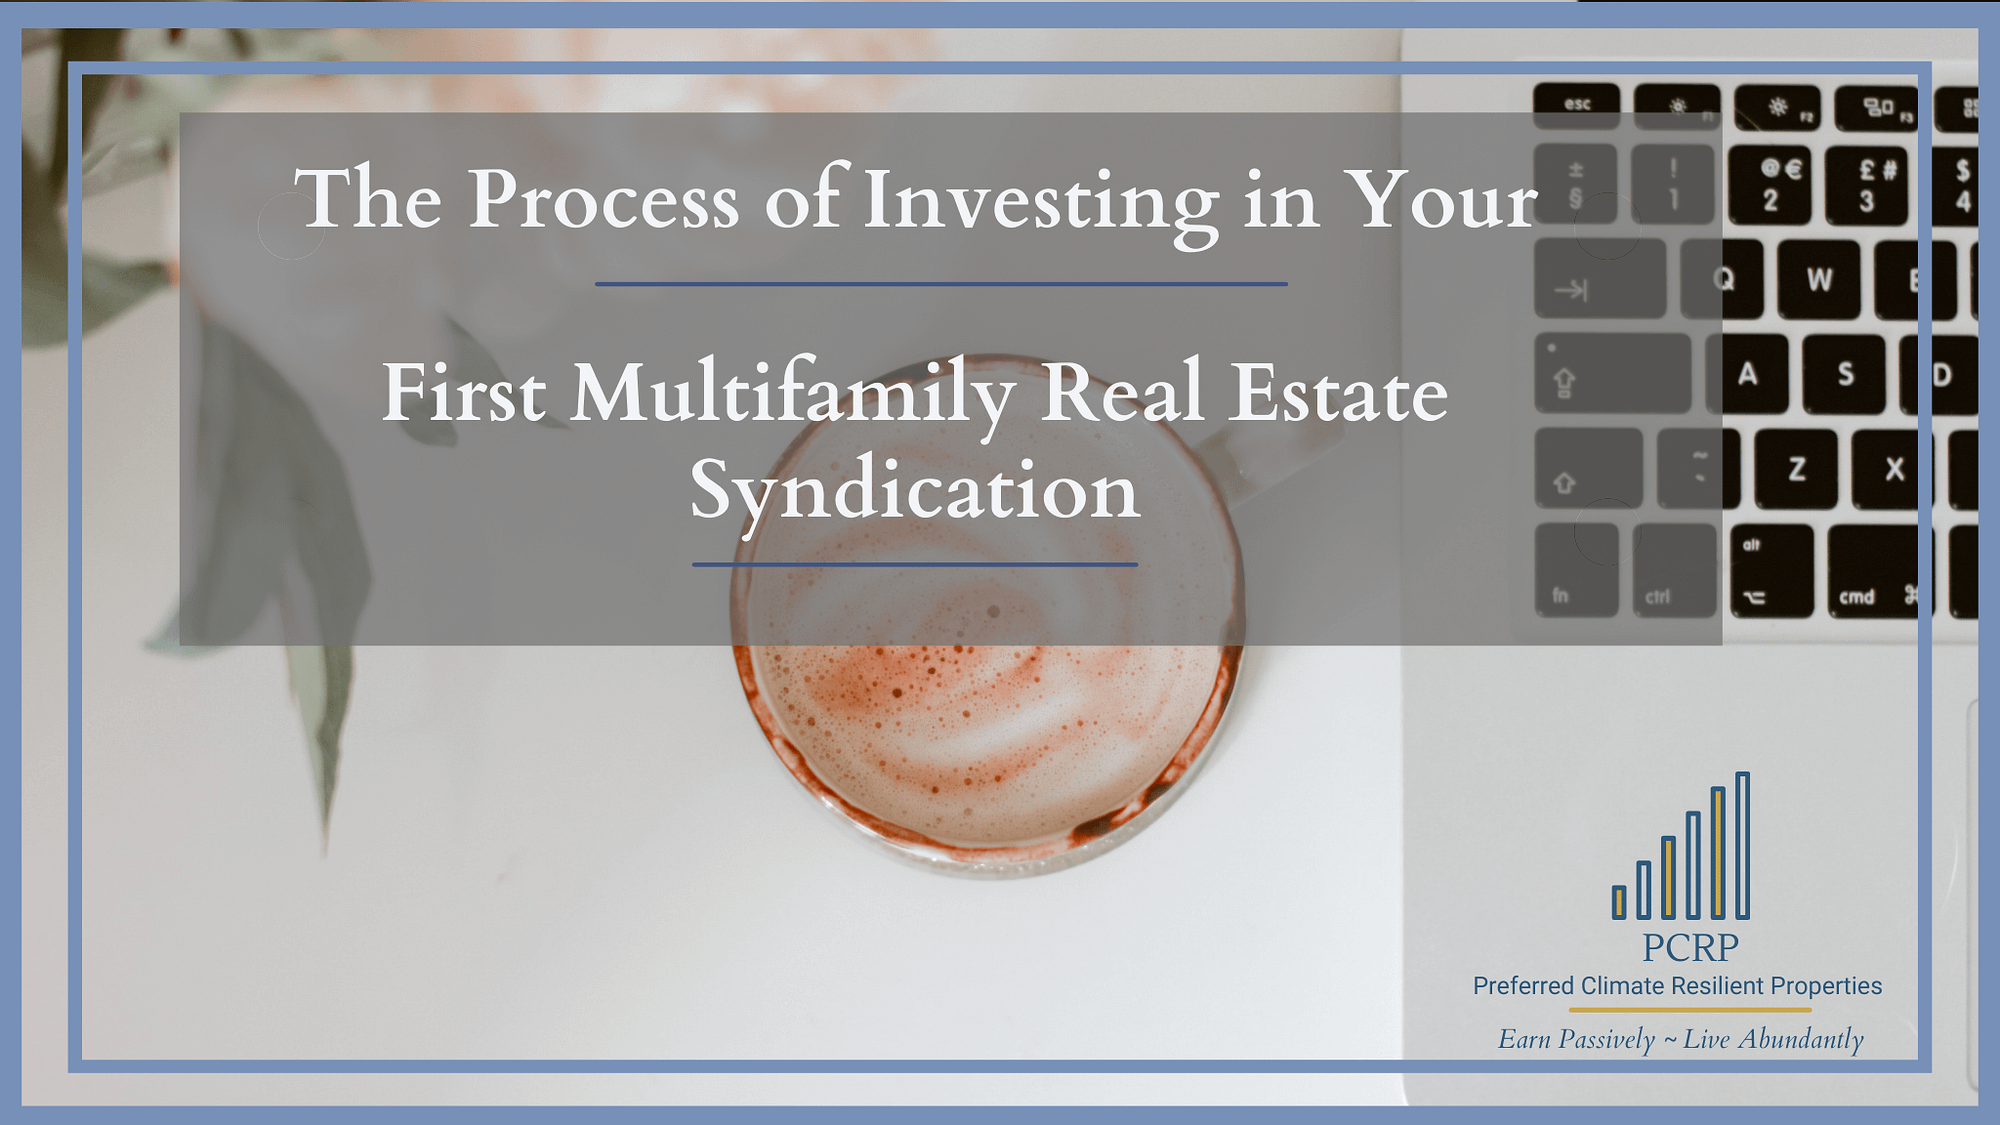 The Process of Investing in Your First Multifamily Real Estate Syndication